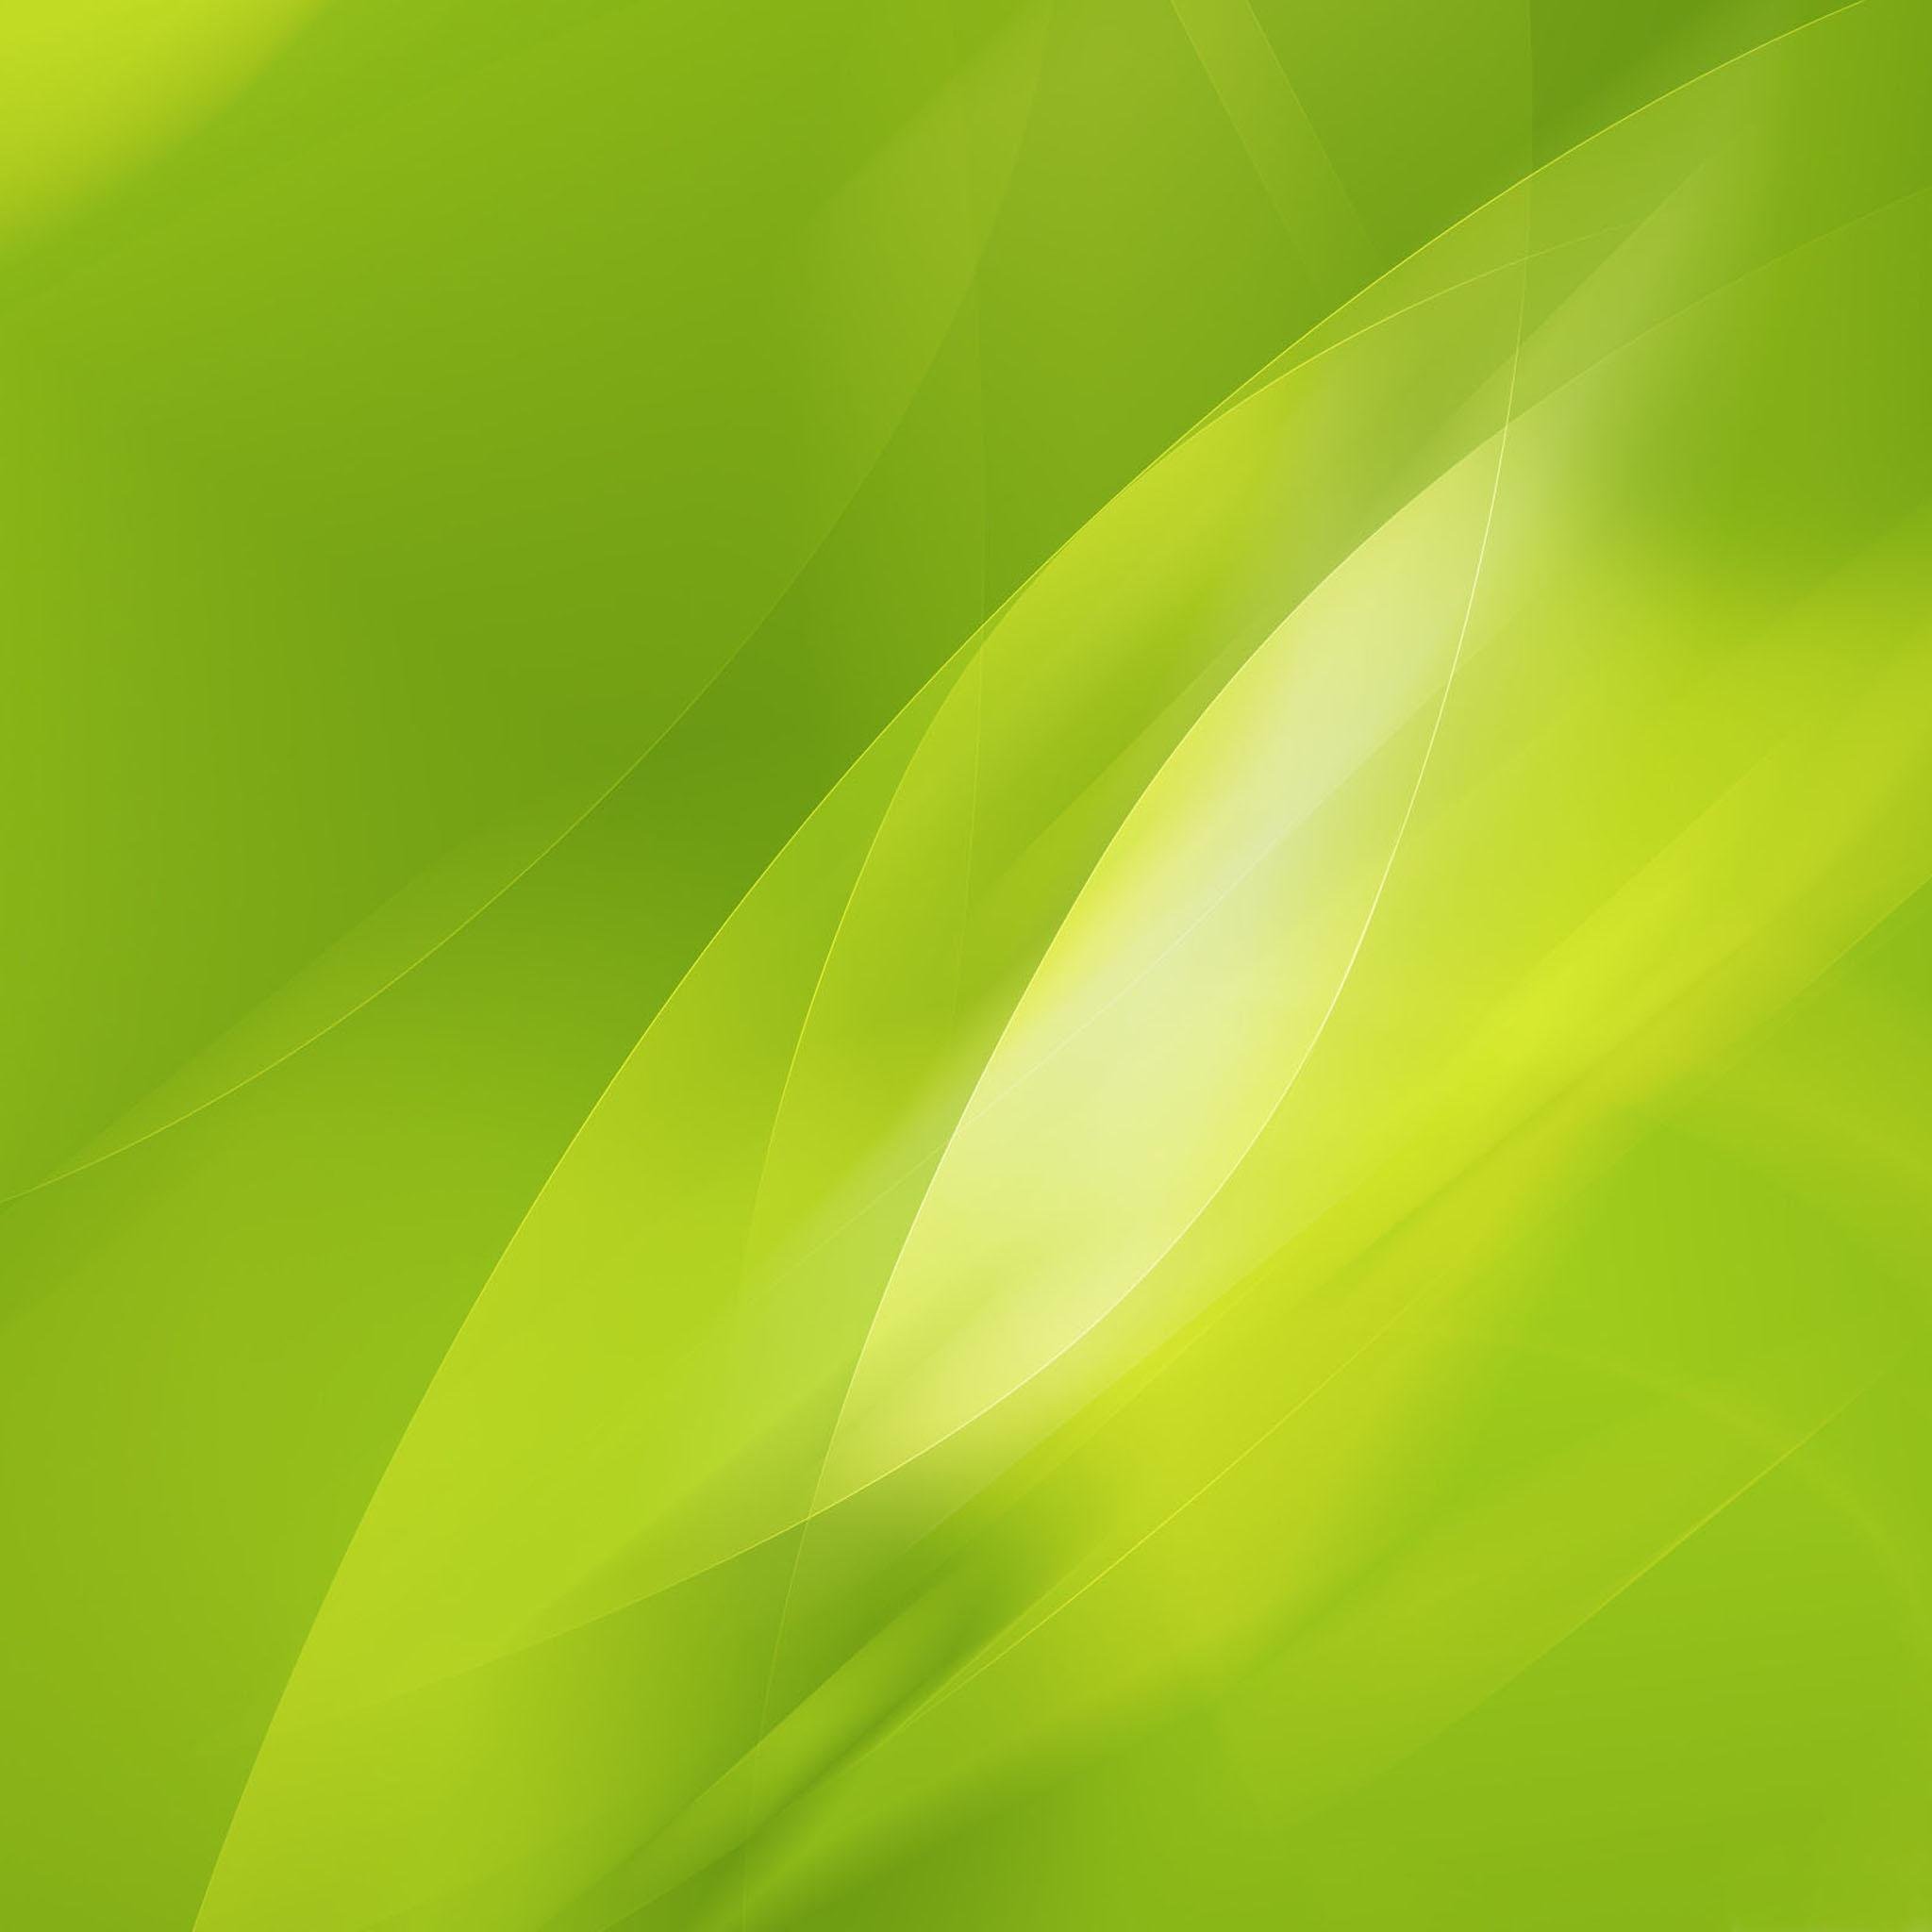 Wallpaper Lime Green   All Wallpapers New